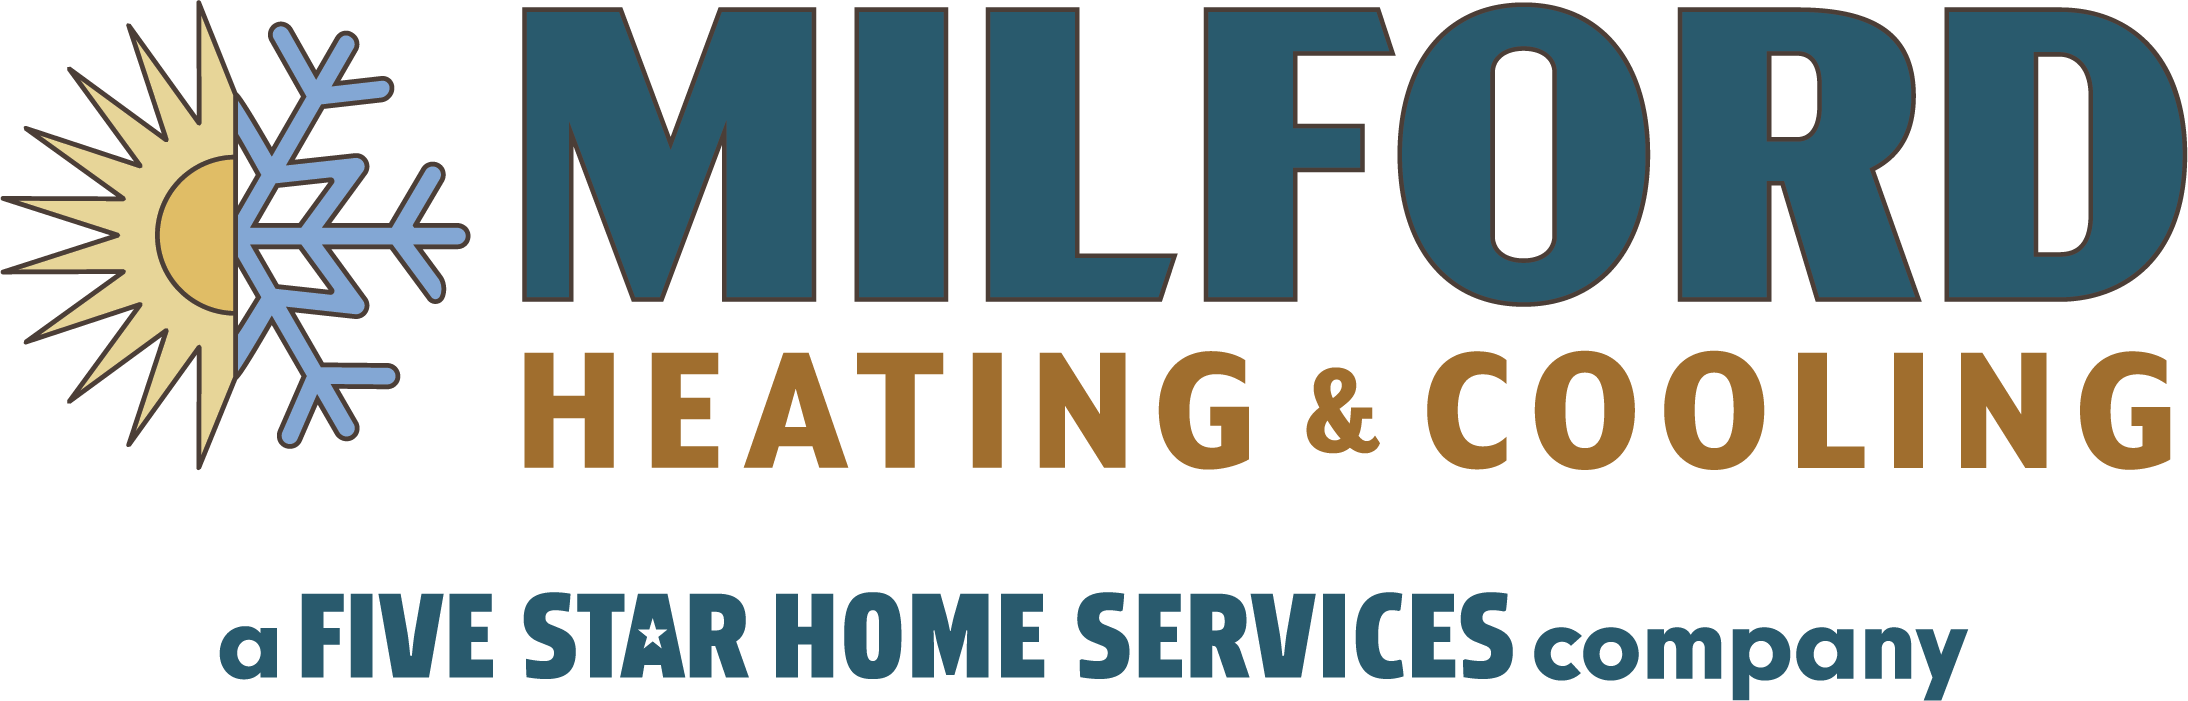 Milford Heating & Cooling